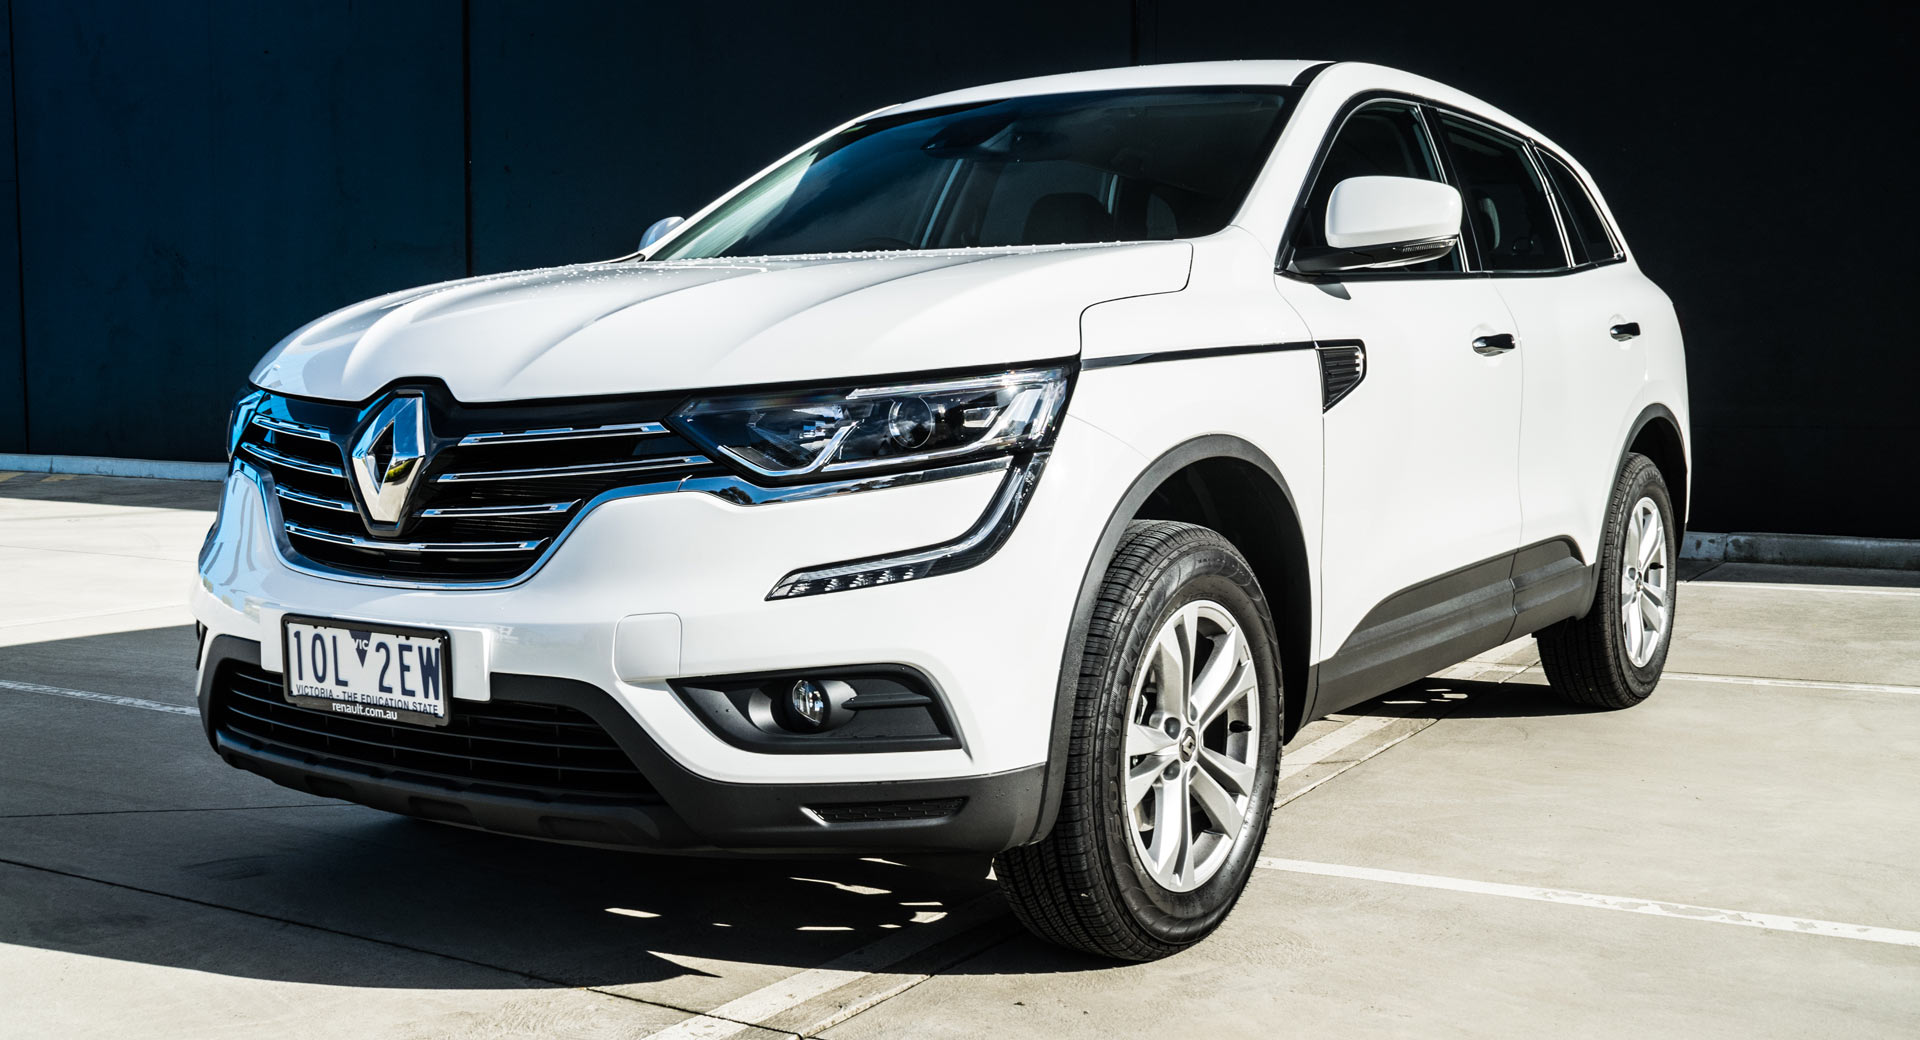 Driven: 2019 Renault Koleos Life Is A Good Family SUV But Not